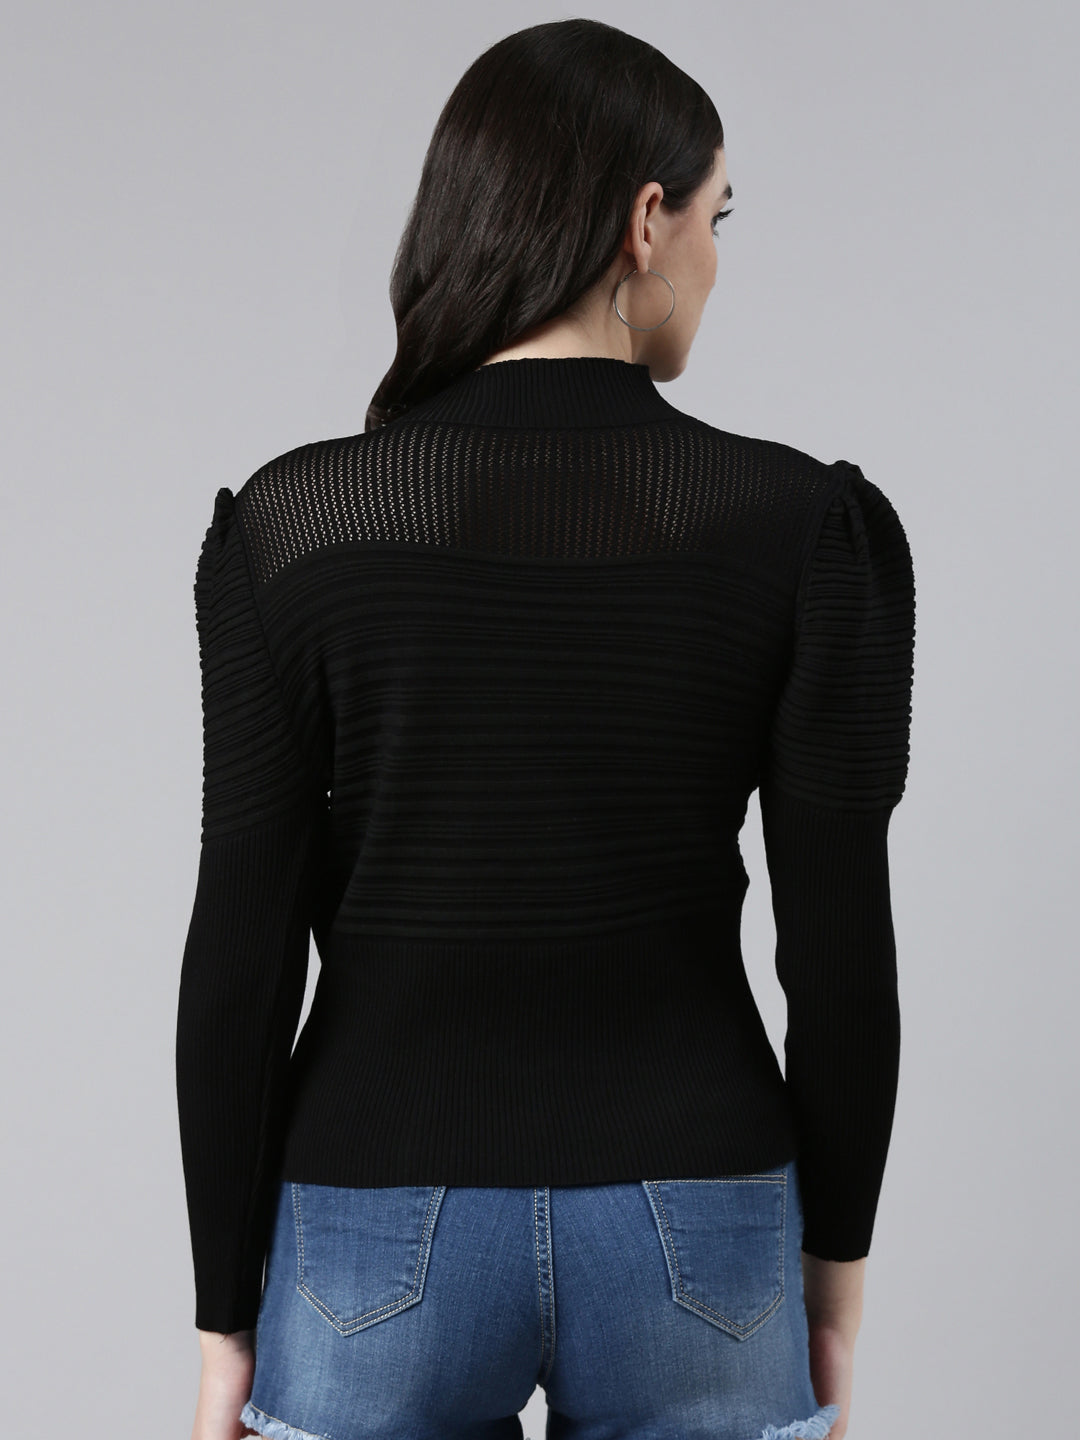 High Neck Self Design Puff Sleeves Fitted Black Top